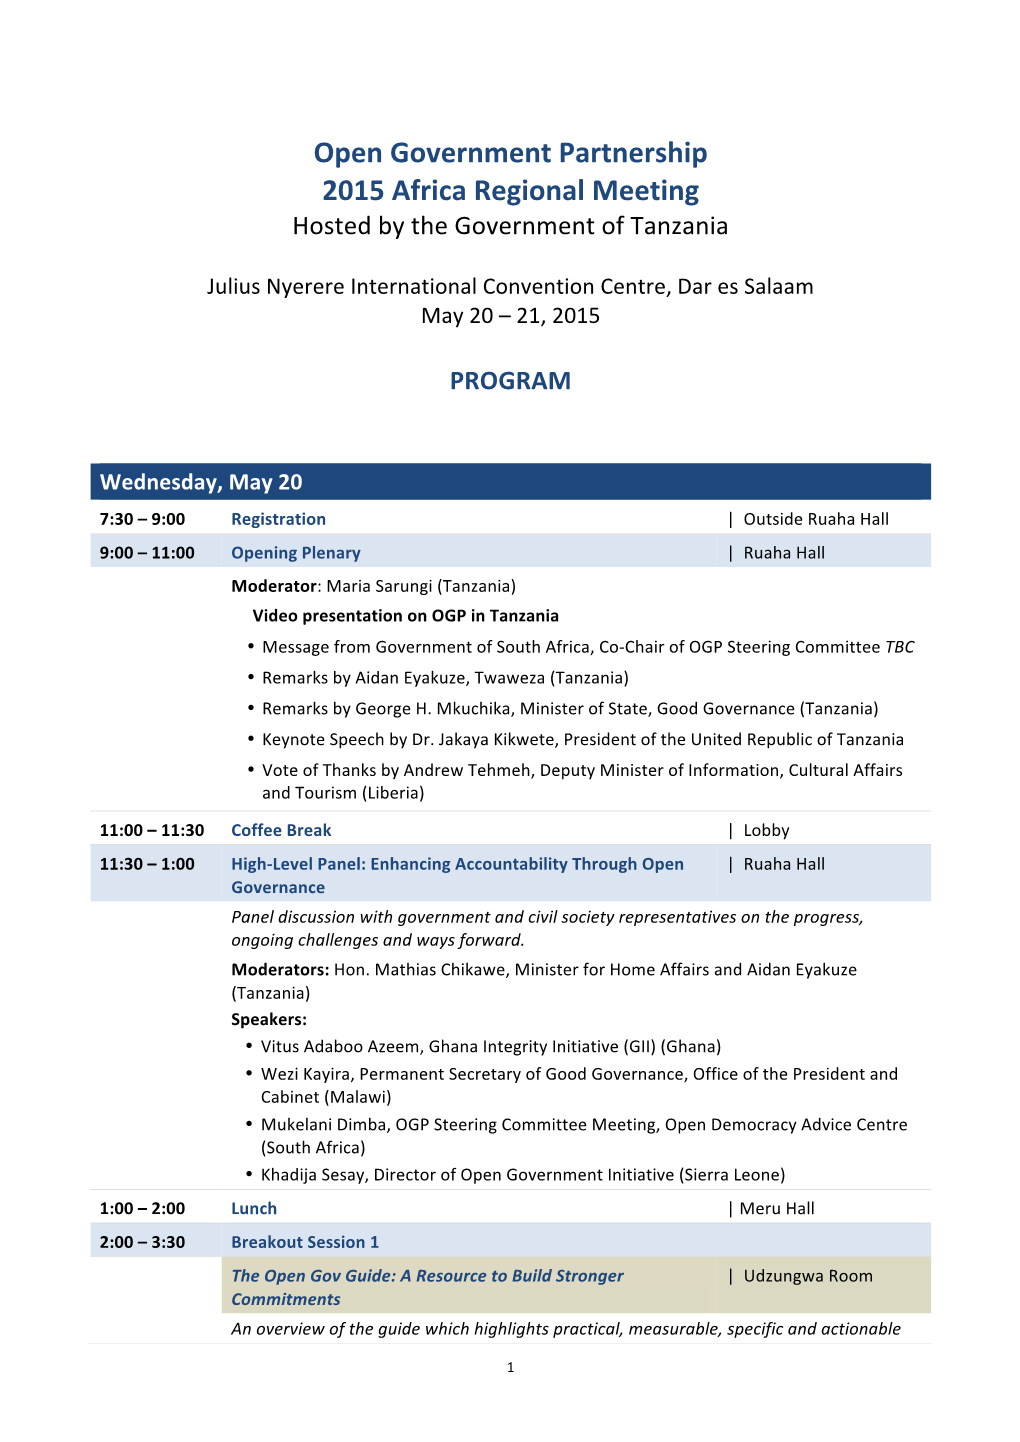 Open Government Partnership 2015 Africa Regional Meeting Hosted by the Government of Tanzania